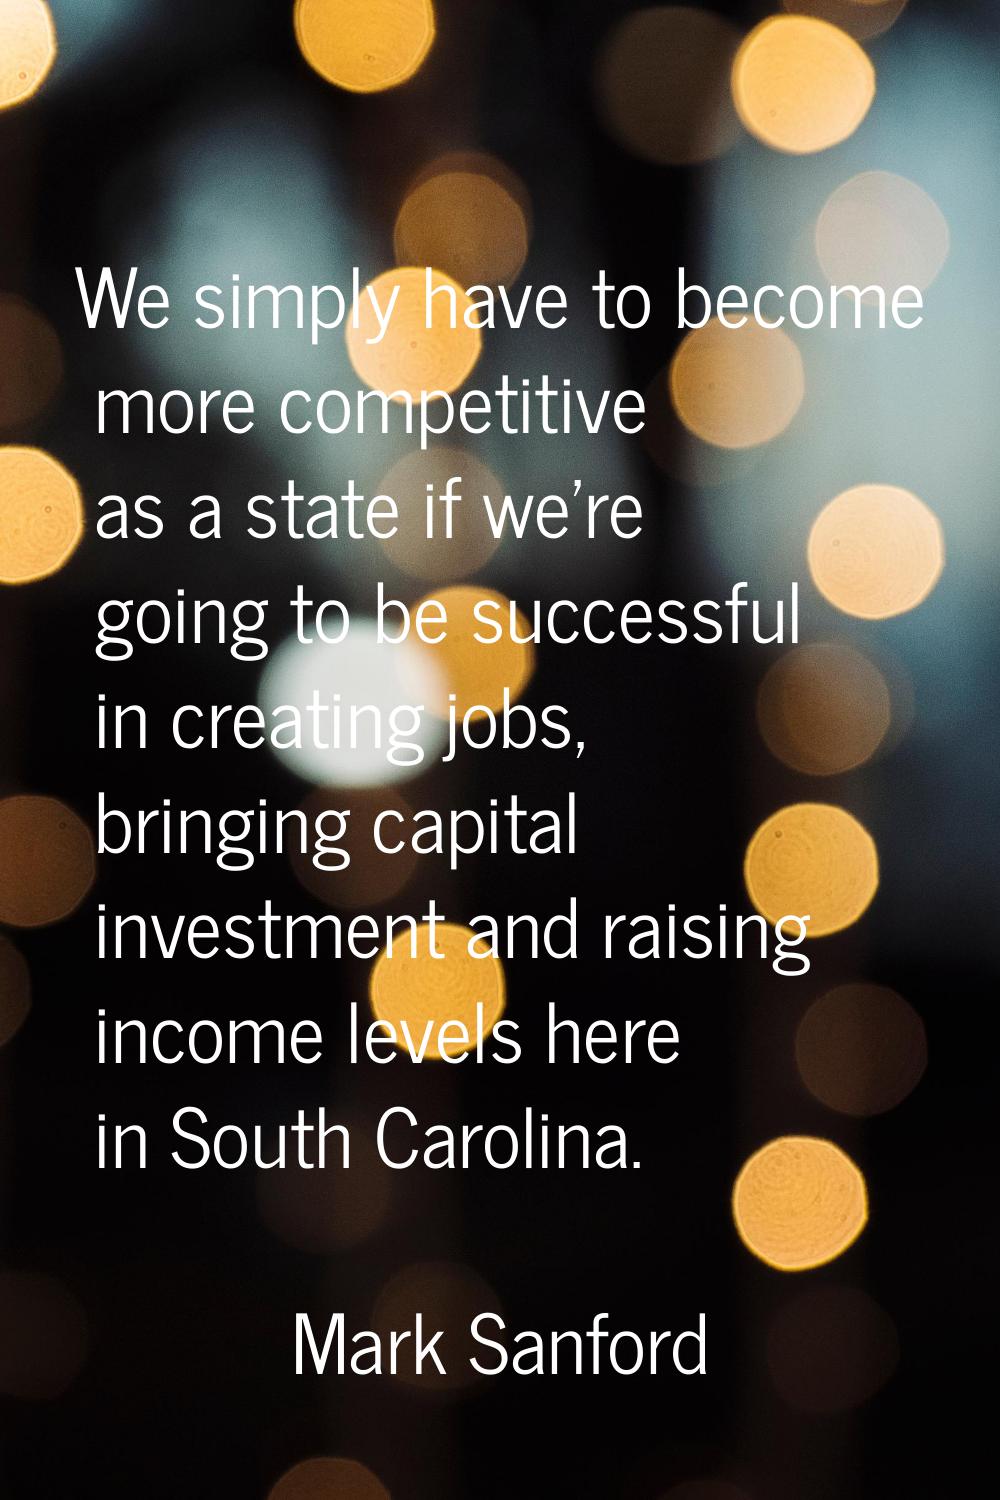 We simply have to become more competitive as a state if we're going to be successful in creating jo